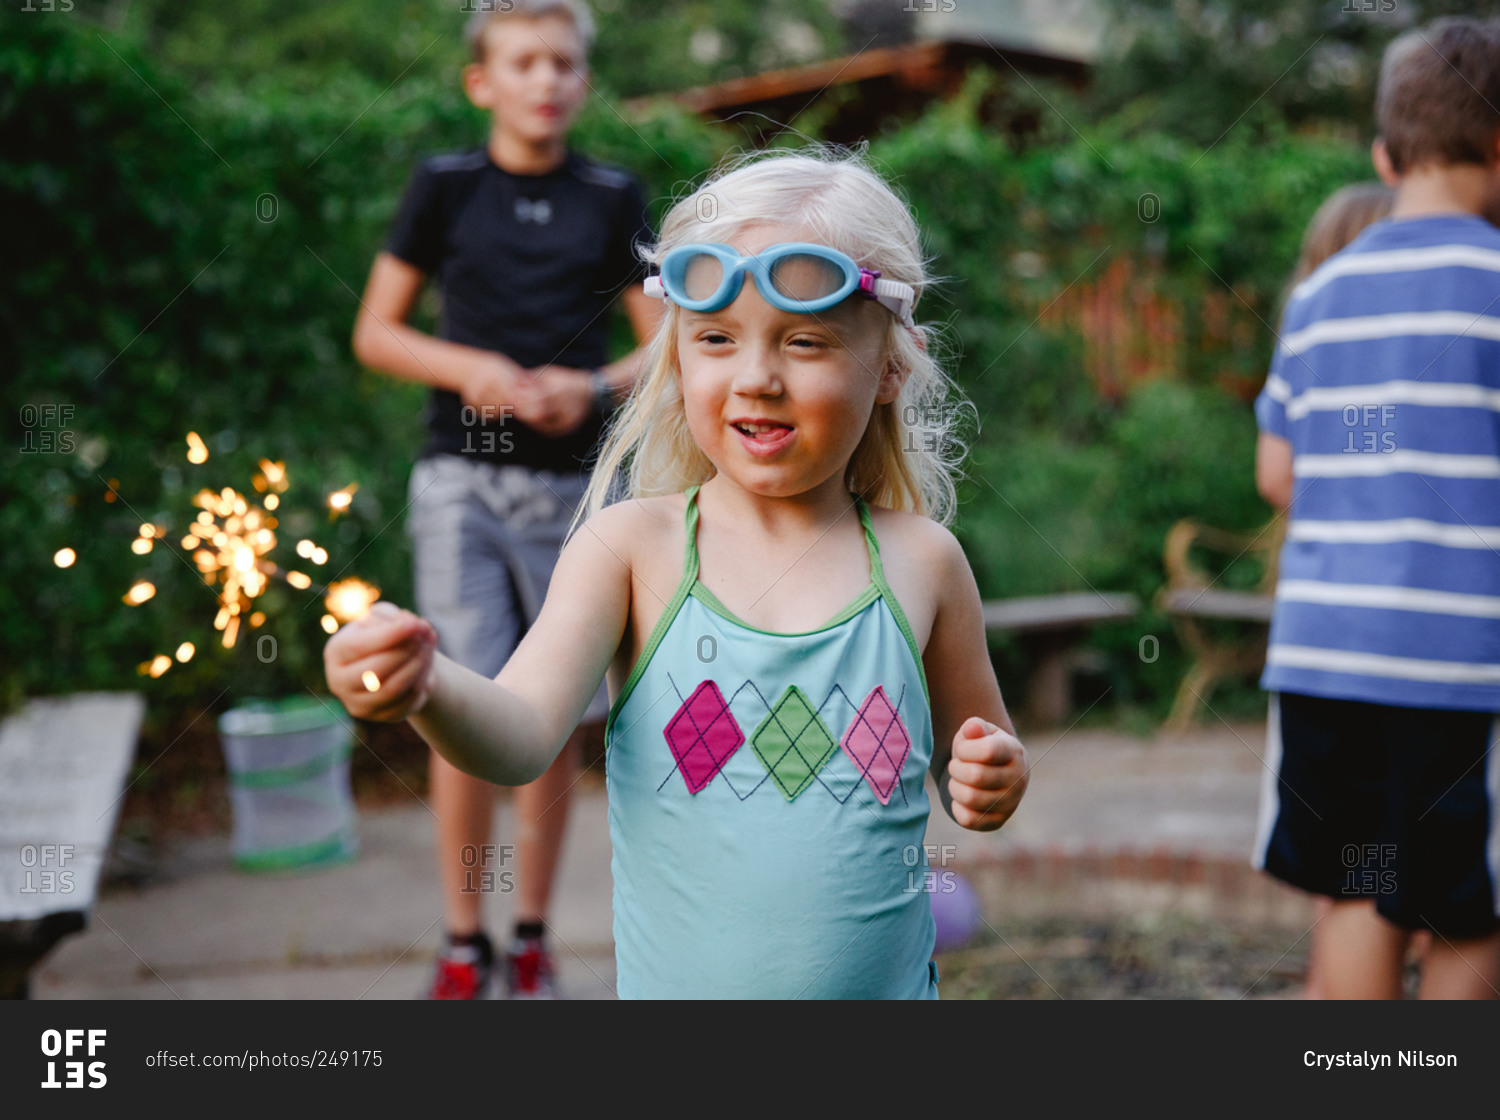 Kids playing with sparklers in the backyard